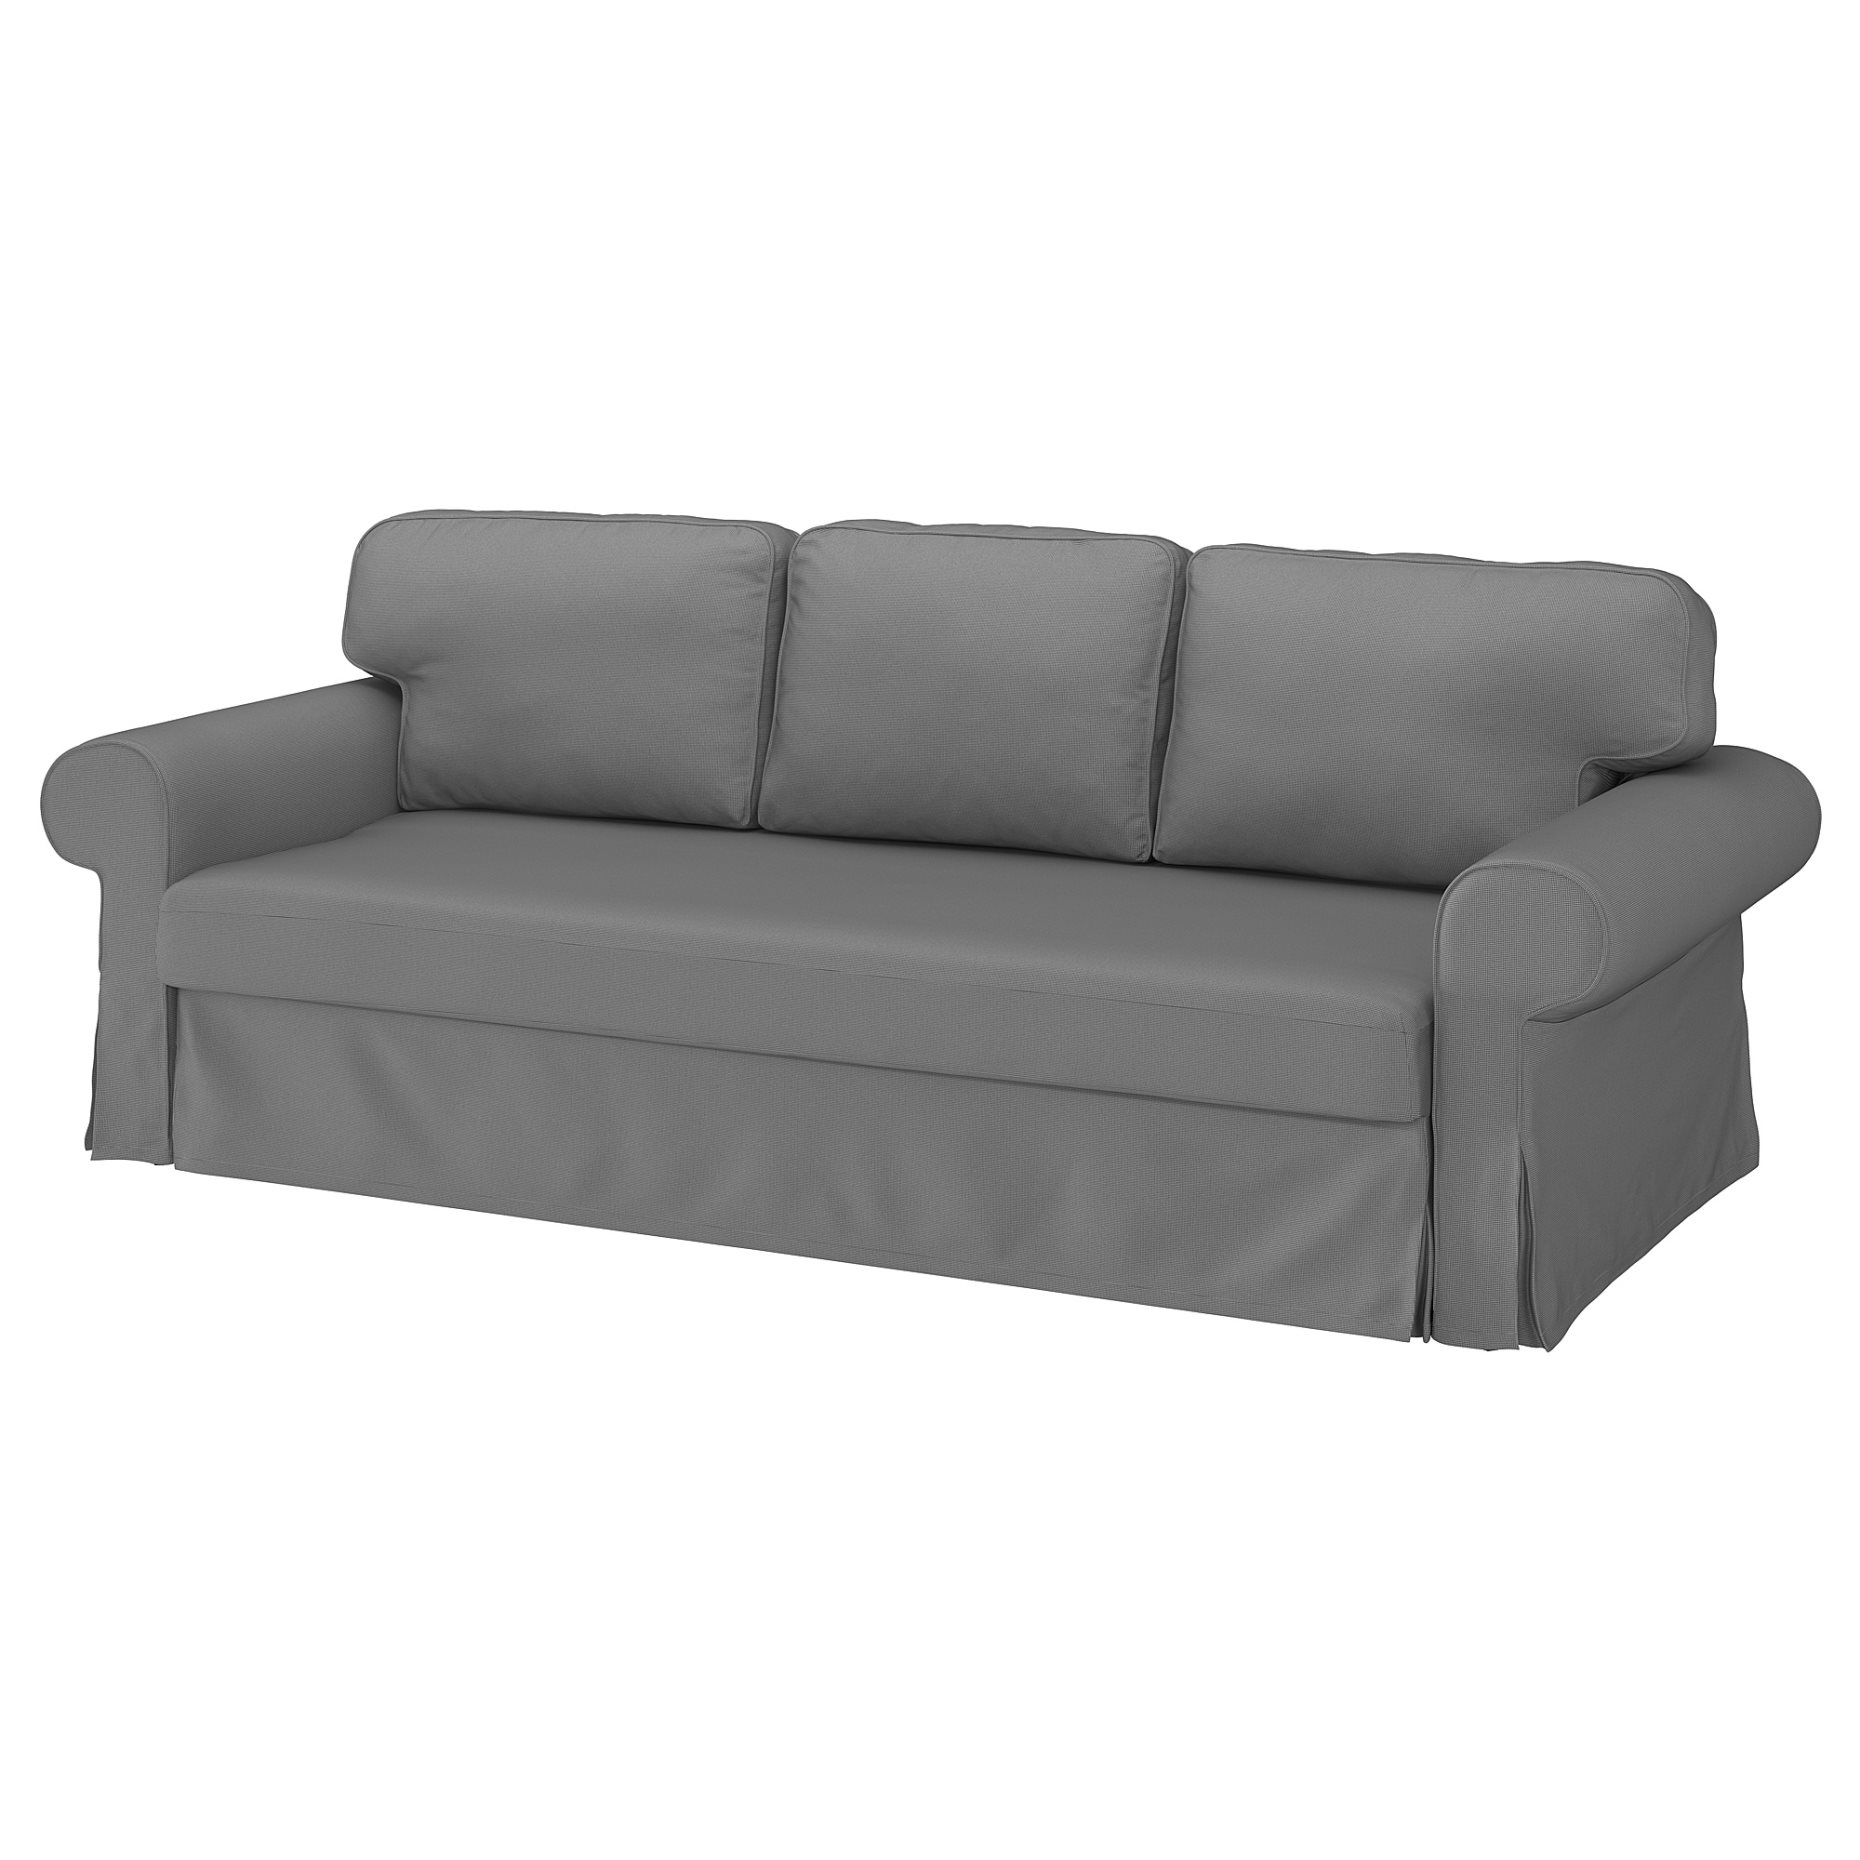 VRETSTORP, cover for 3-seat sofa-bed, 004.726.22